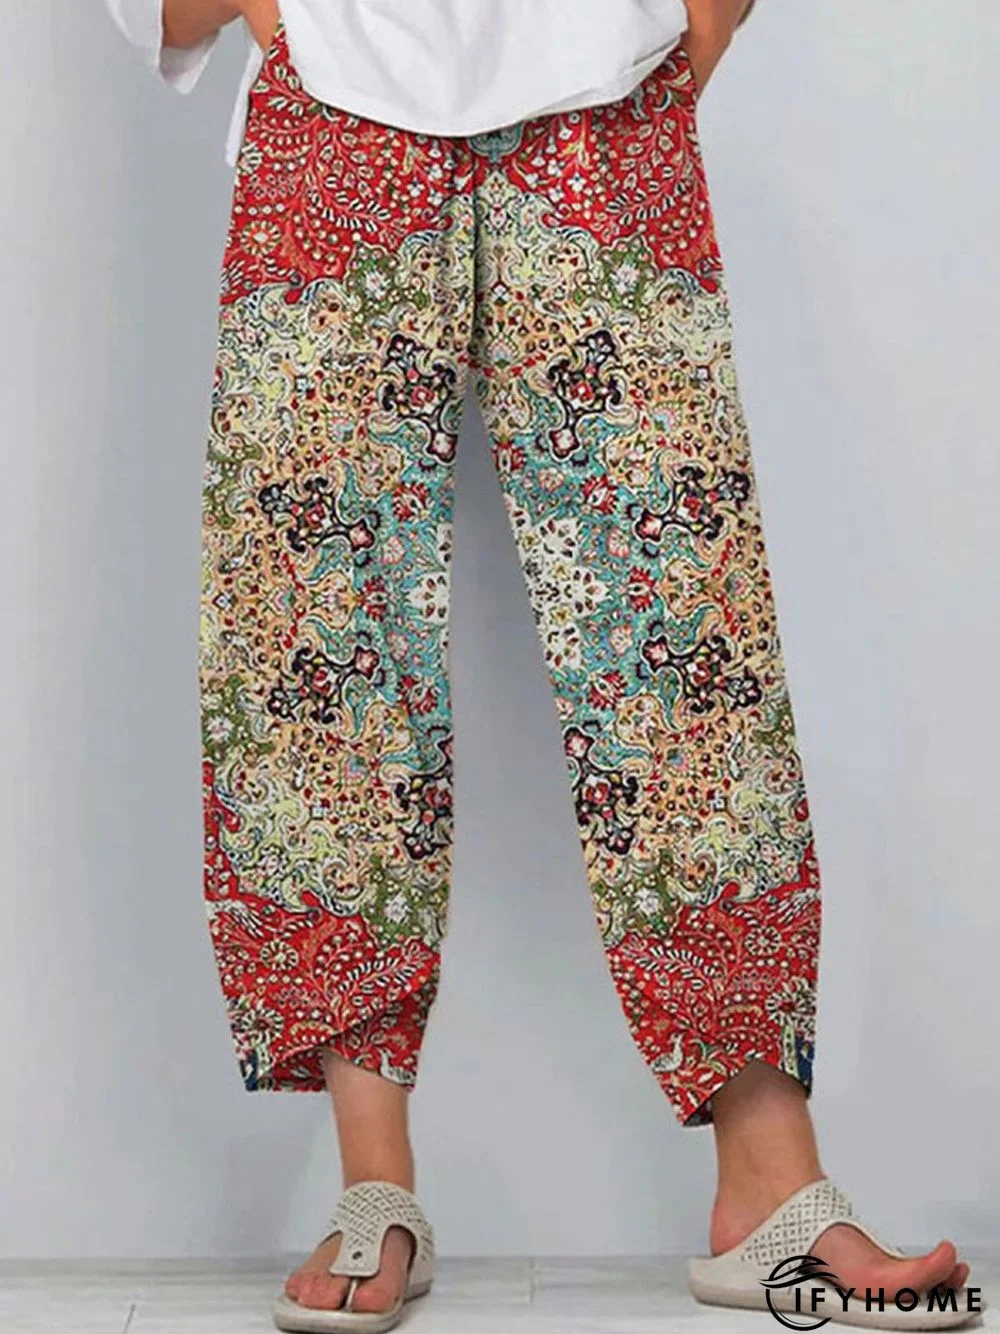 Ethnic Casual Casual Pants | IFYHOME